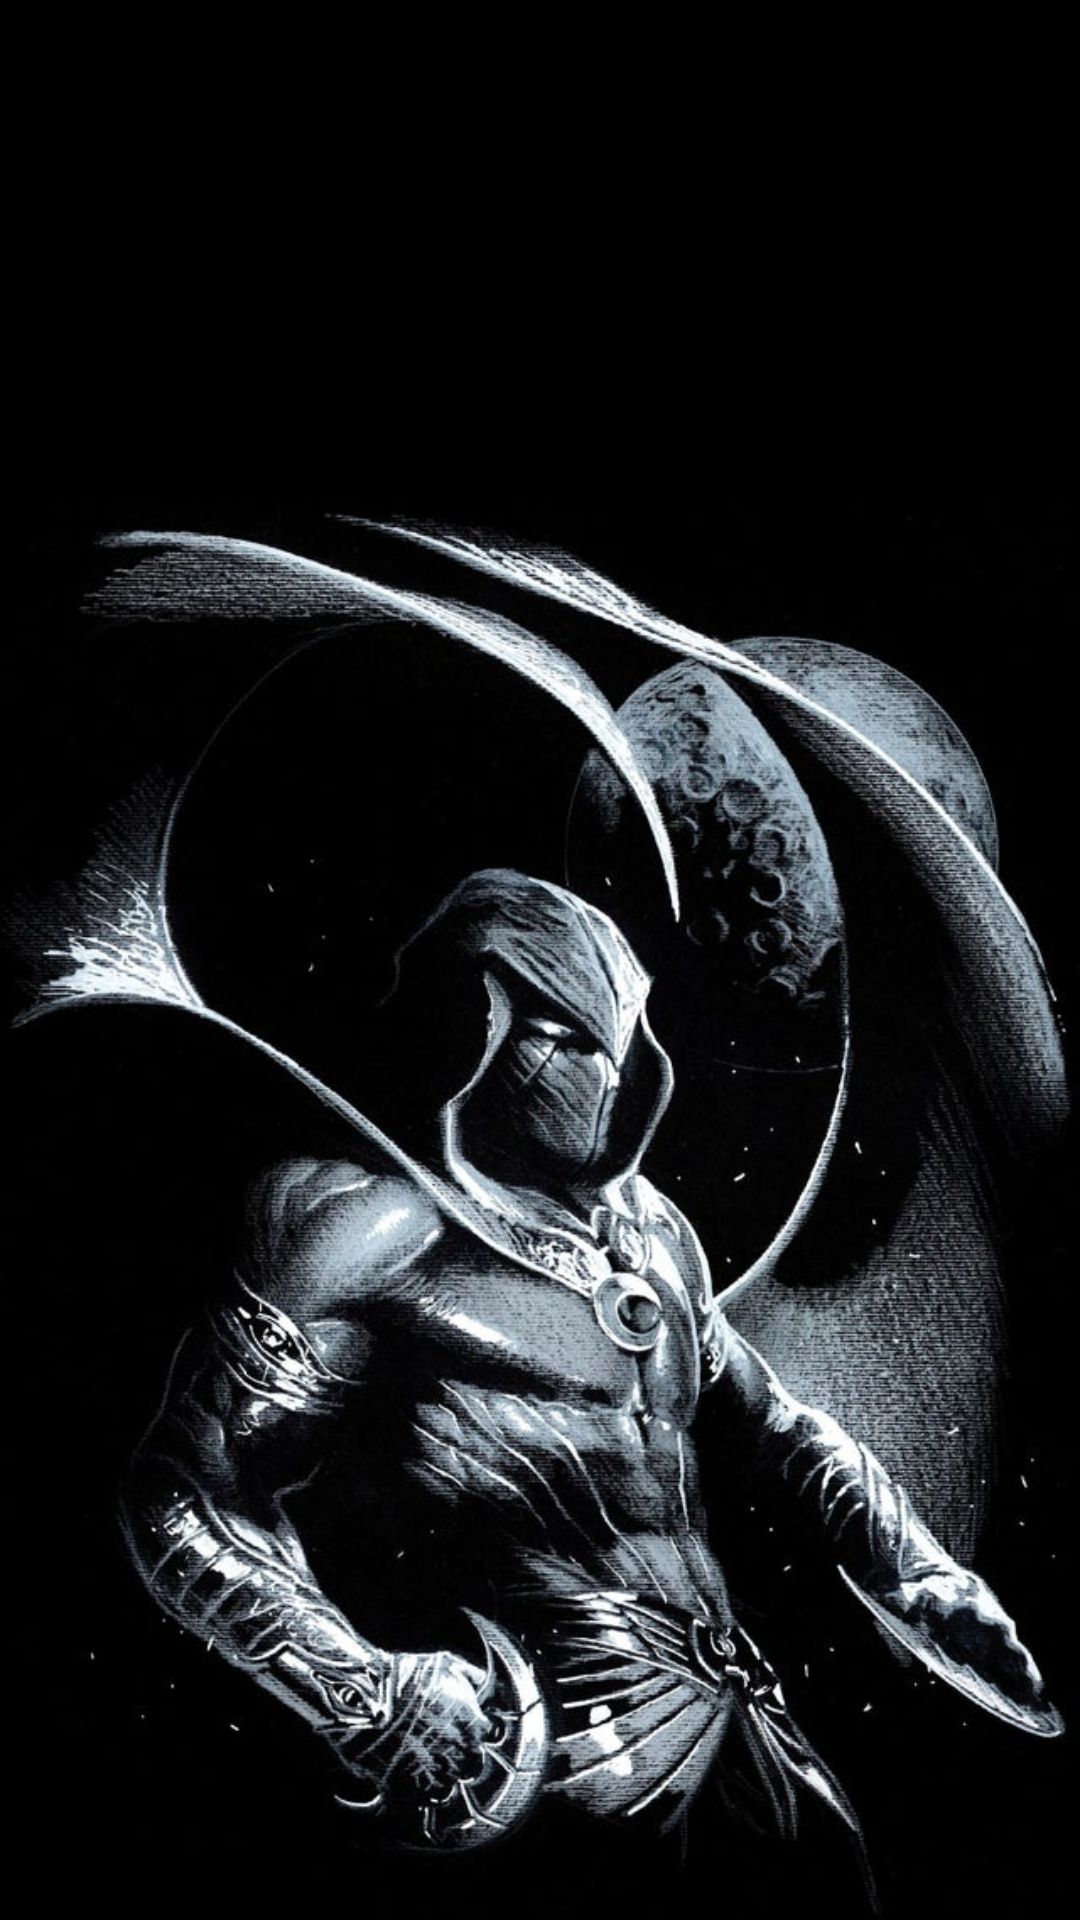 Moon Knight Iphone Hd Wallpapers - Wallpaper Cave